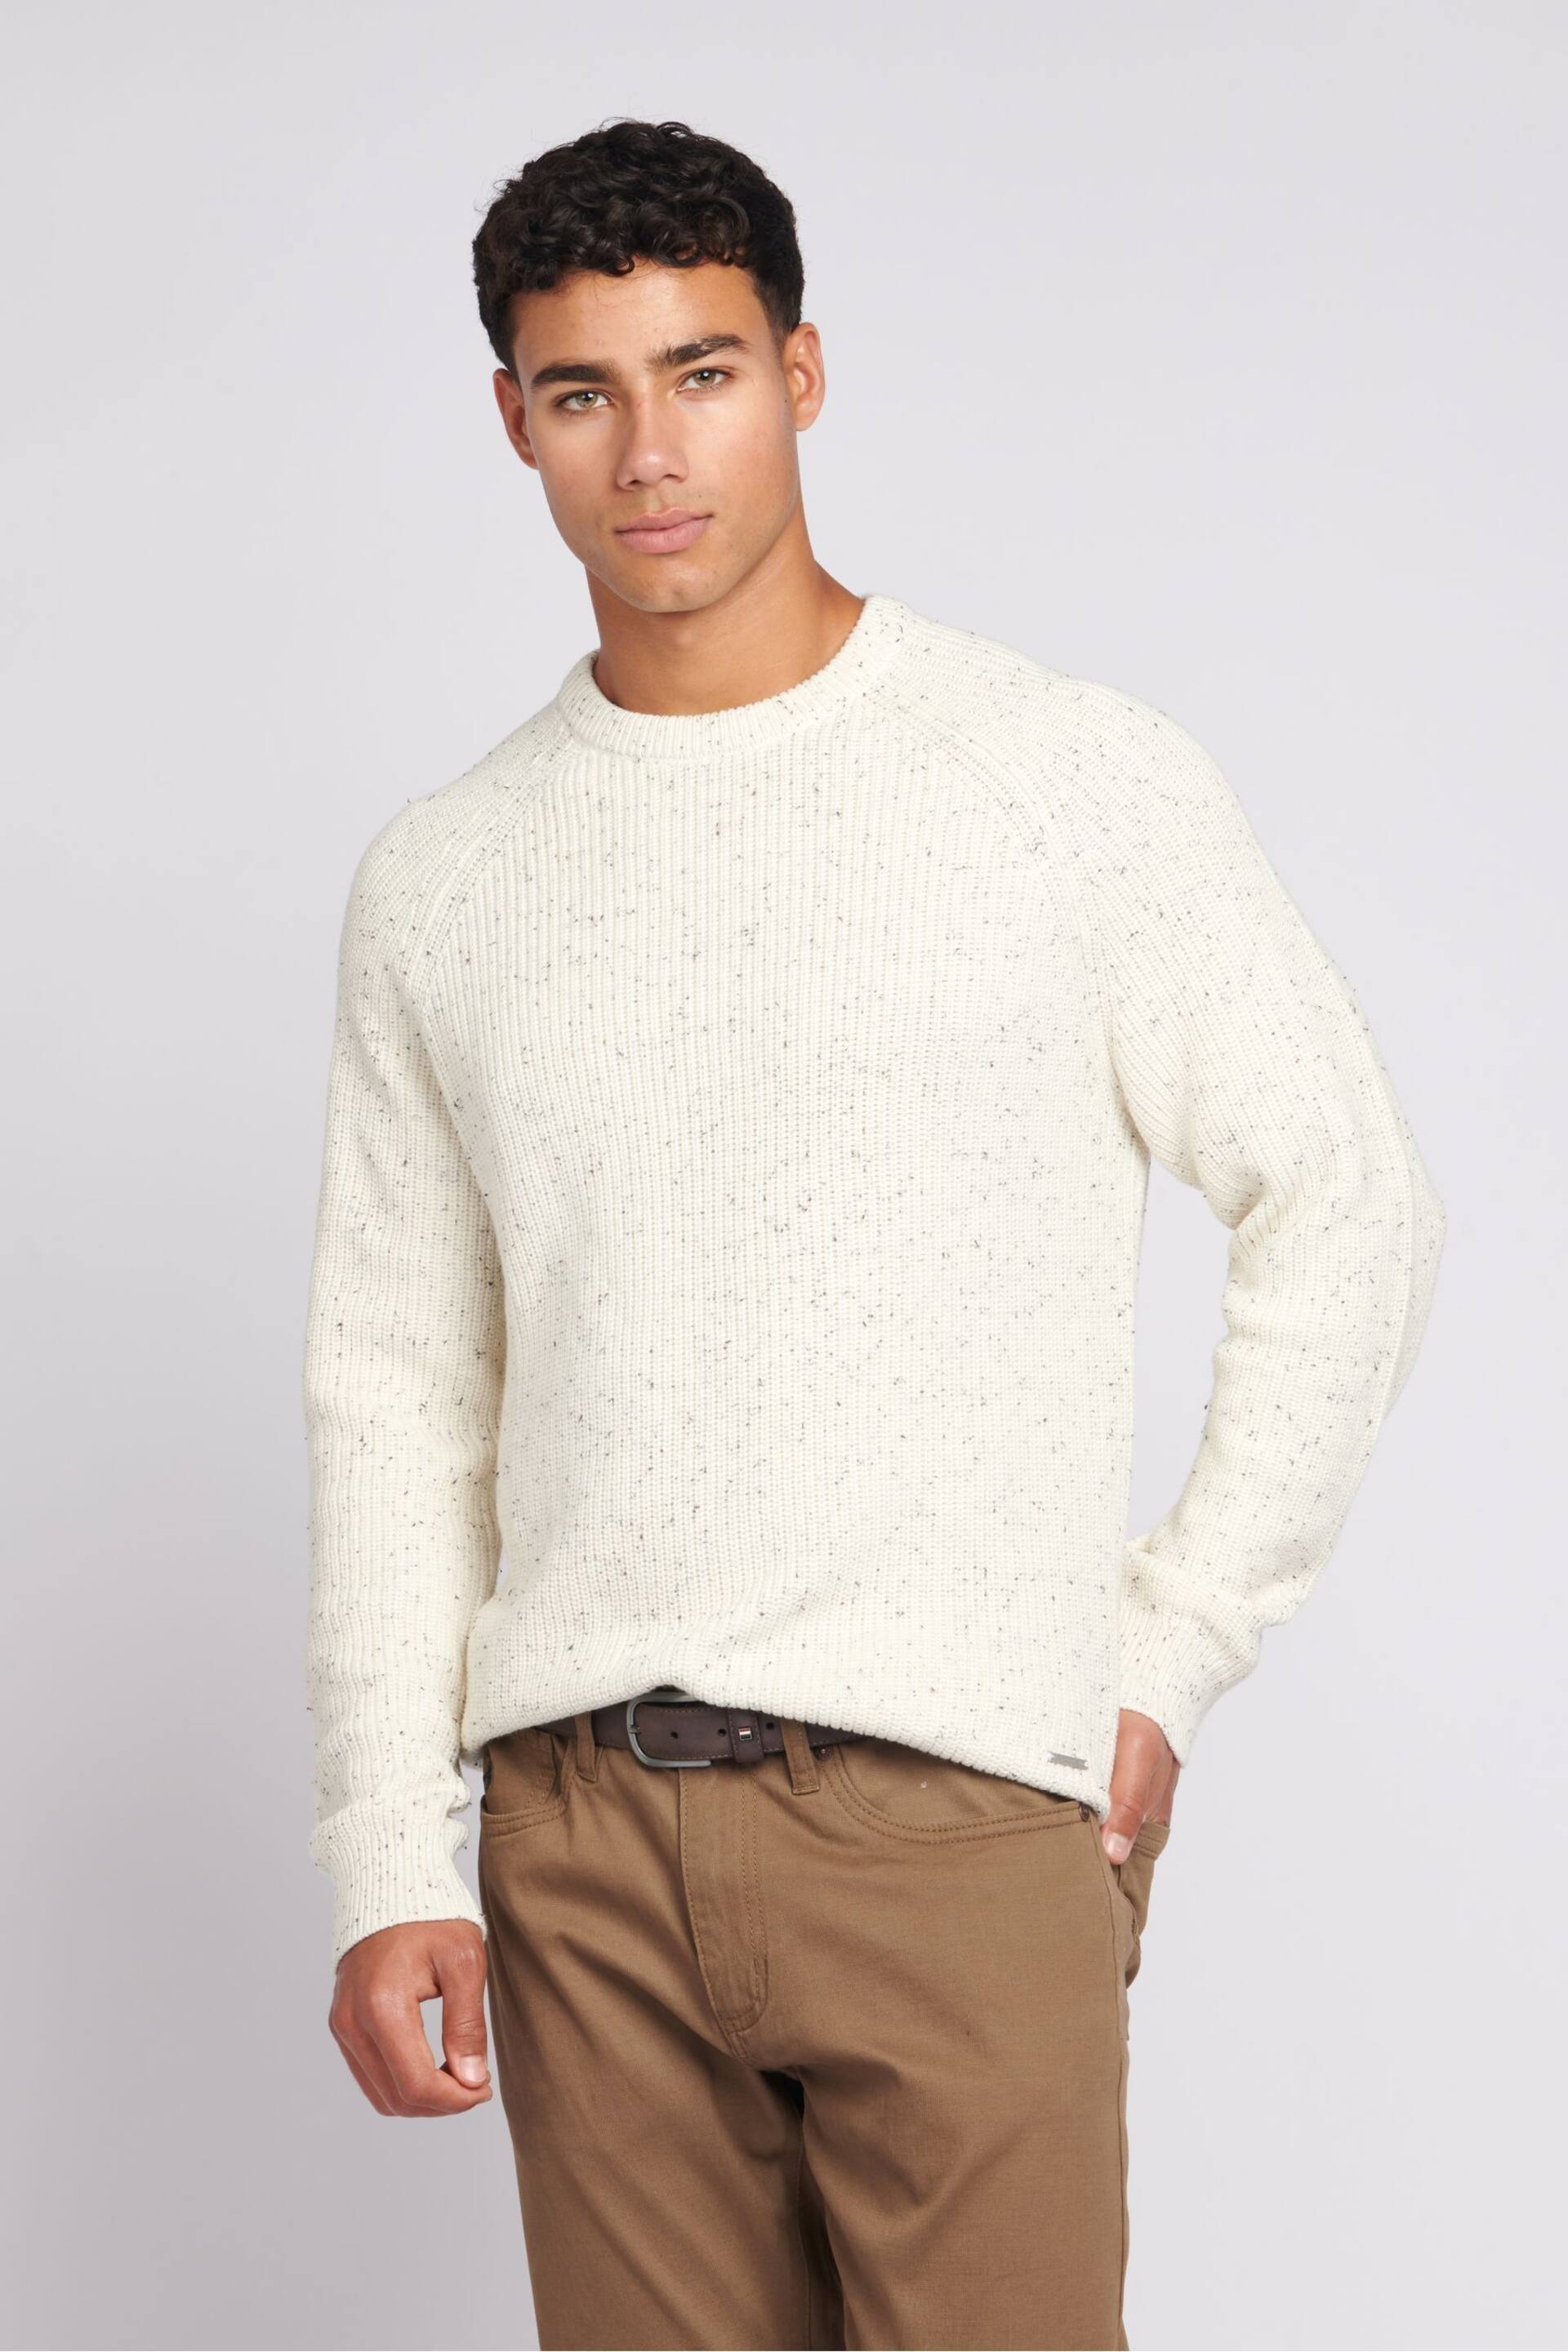 U.S. Polo Assn. Mens Cream Fisherman Nepp Knitted Jumper - Image 1 of 8